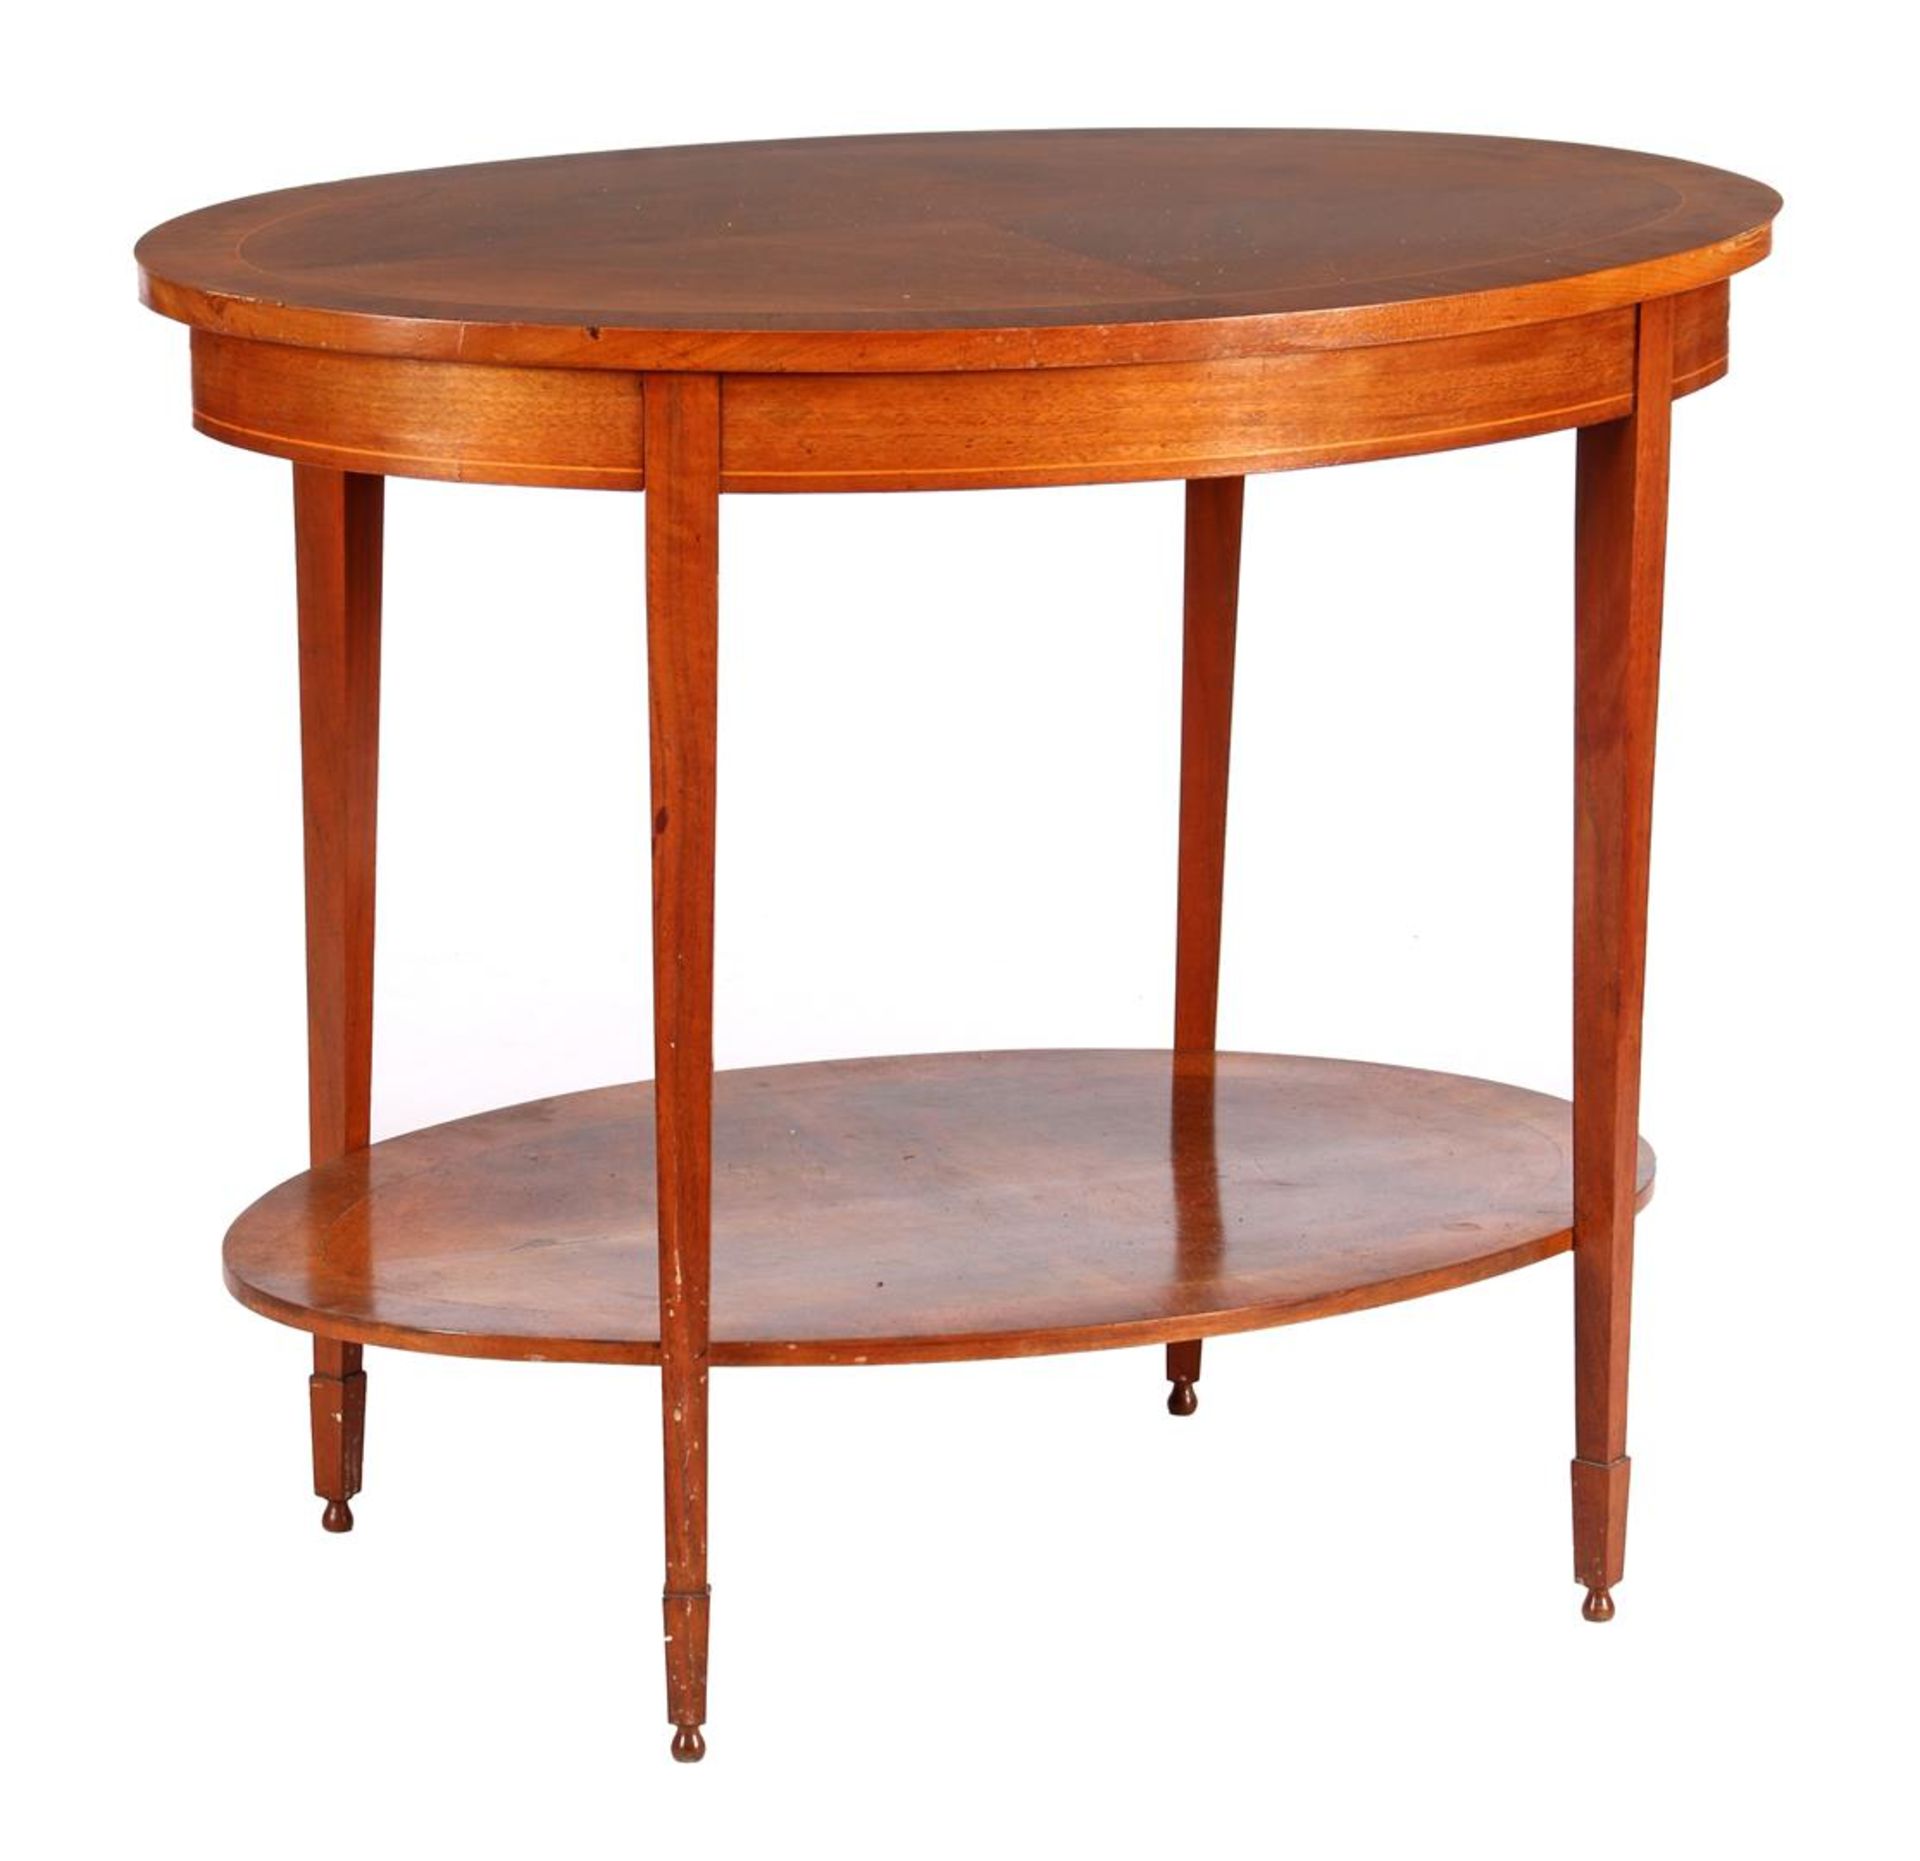 Oval walnut table with bottom shelf and marquetry trim